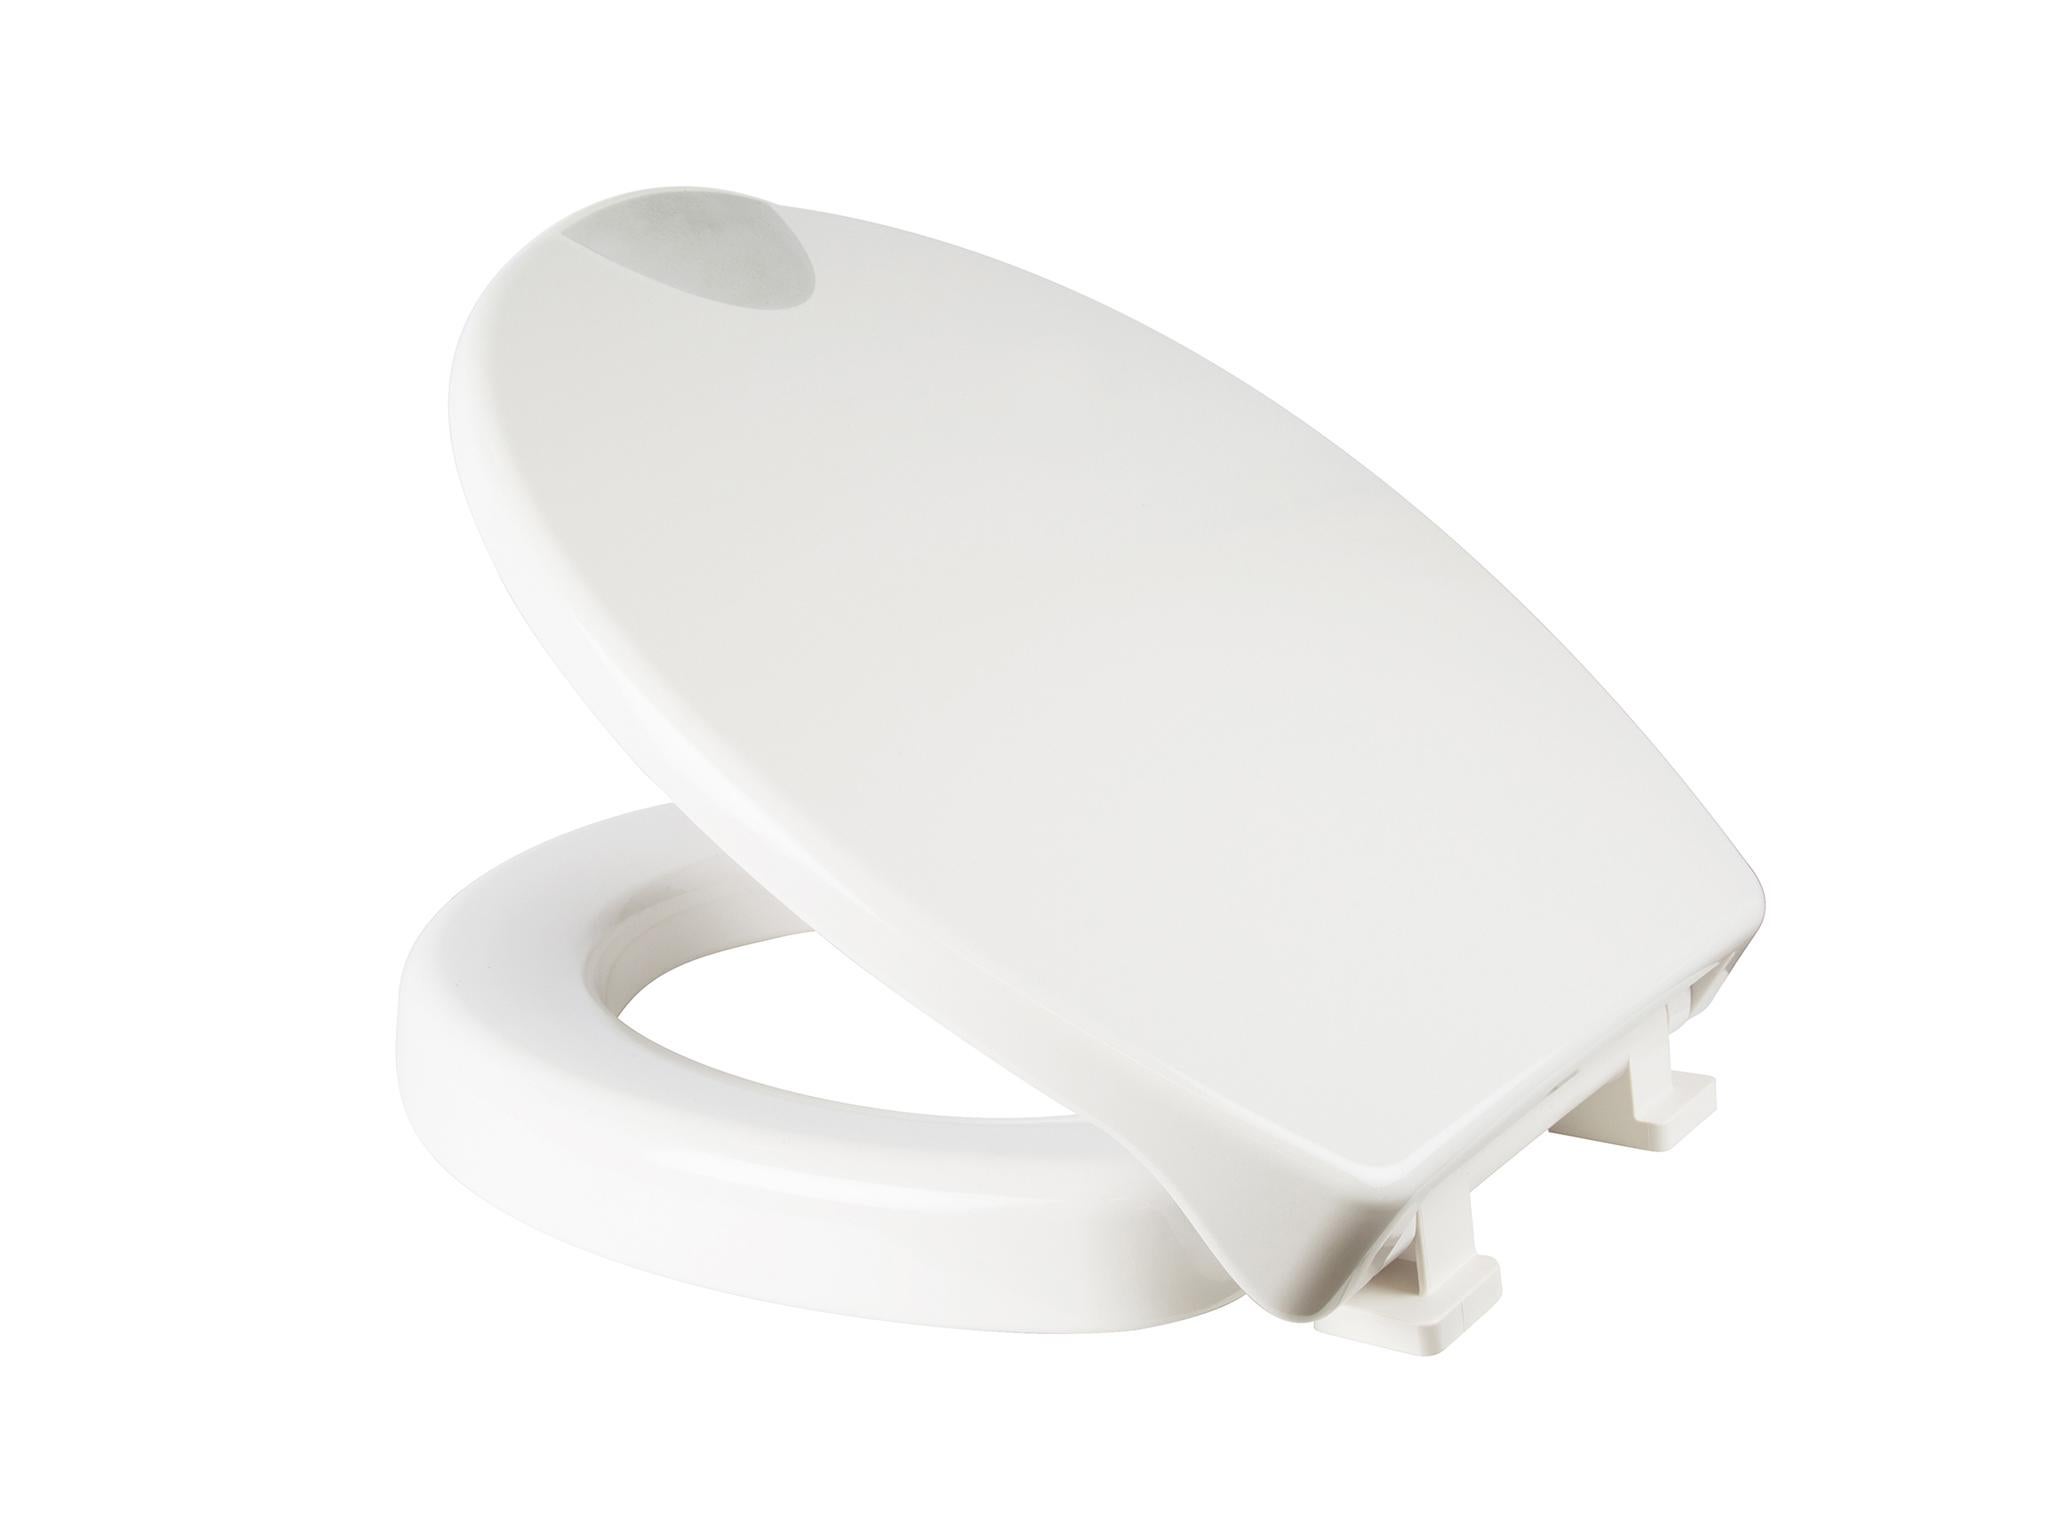  LUXURY QUICK RELEASE TOILET SEAT EASY CLEAN high quality happy treofil miomare  